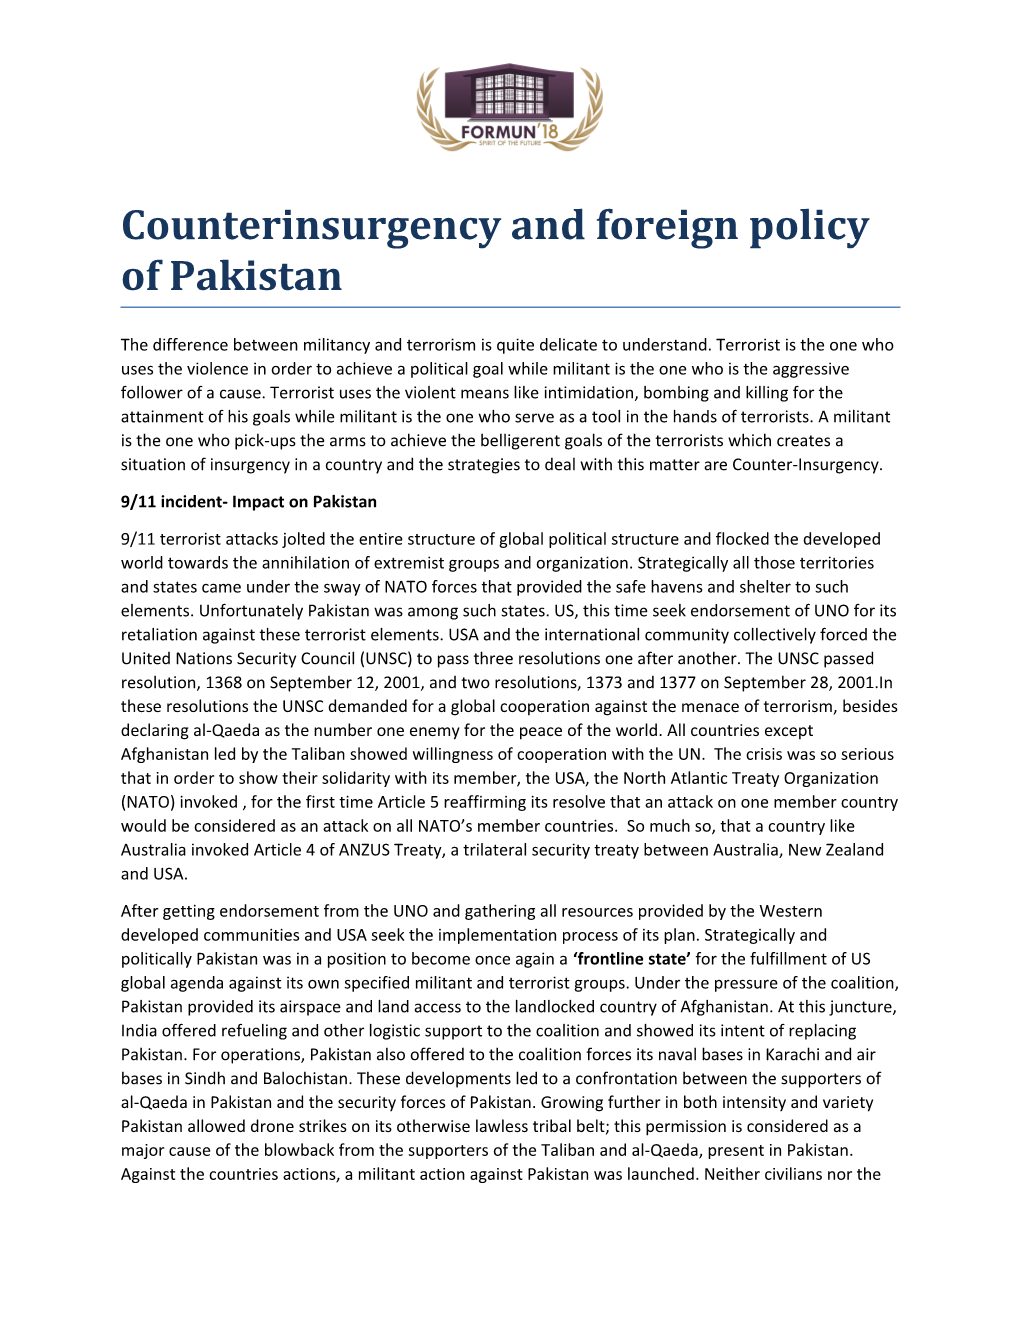 Counterinsurgency and Foreign Policy of Pakistan